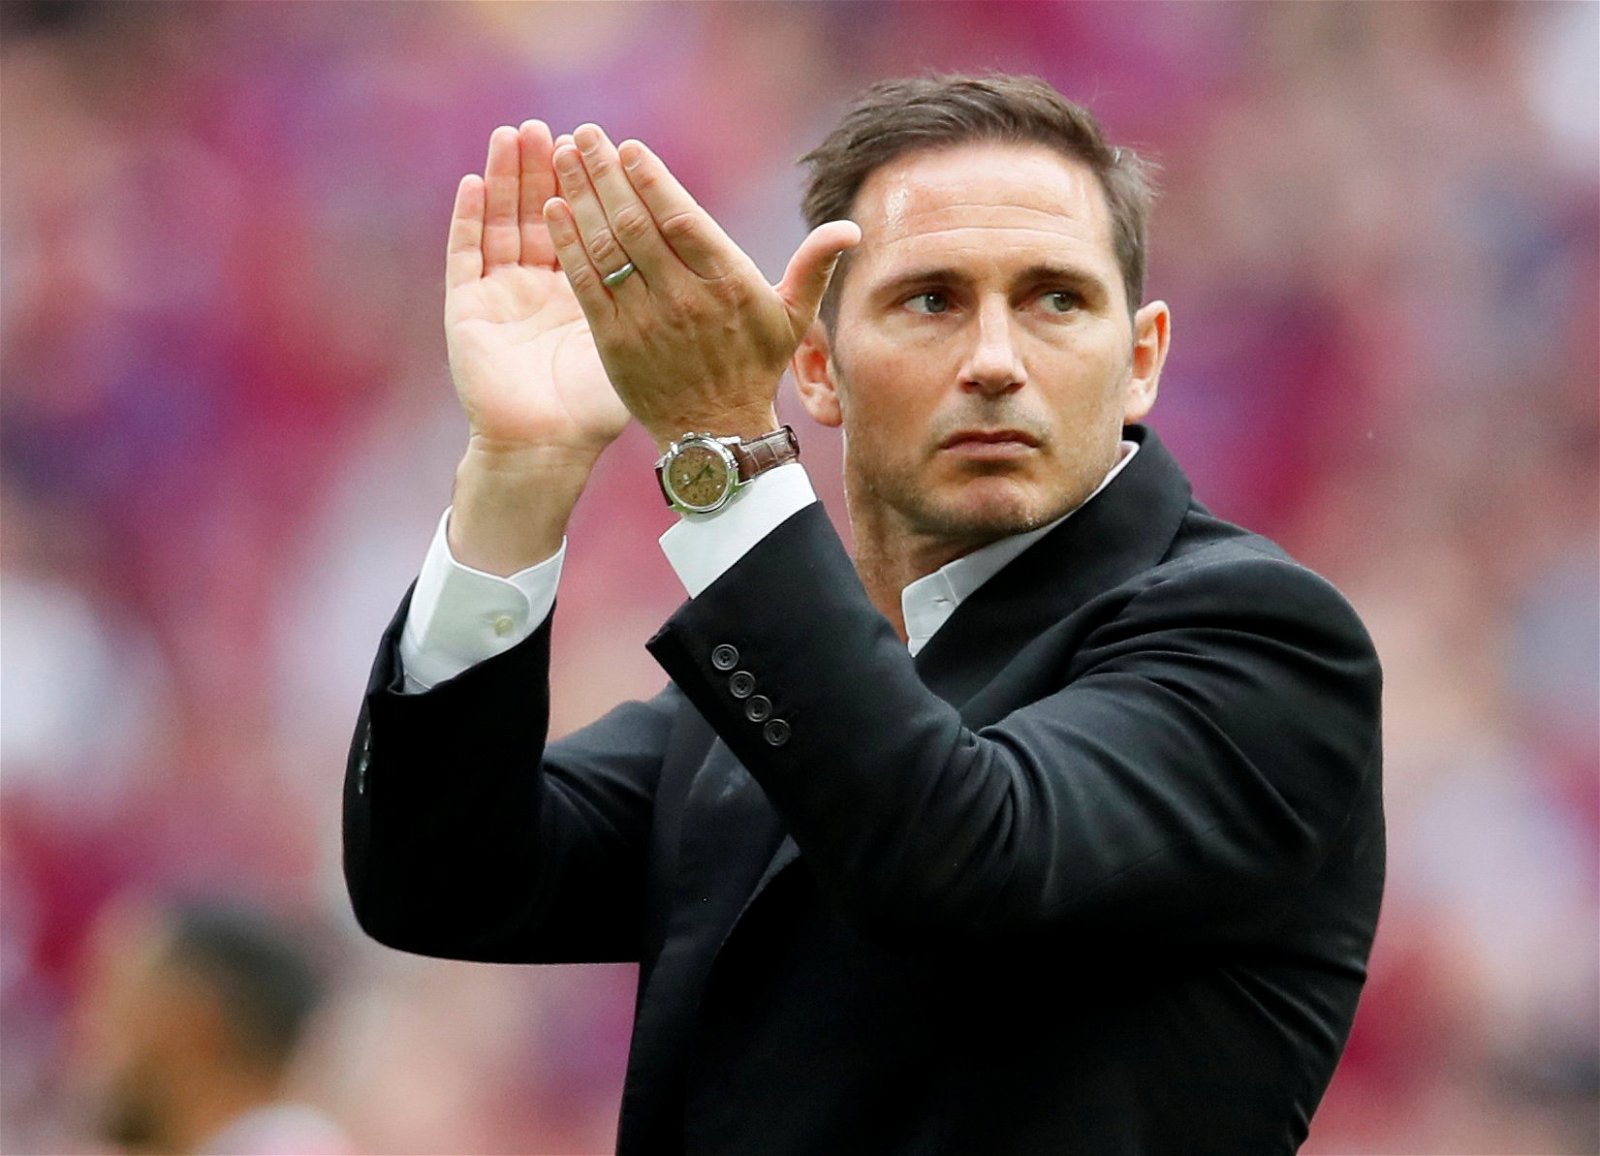 OFFICAL: Frank Lampard is the new Chelsea manager